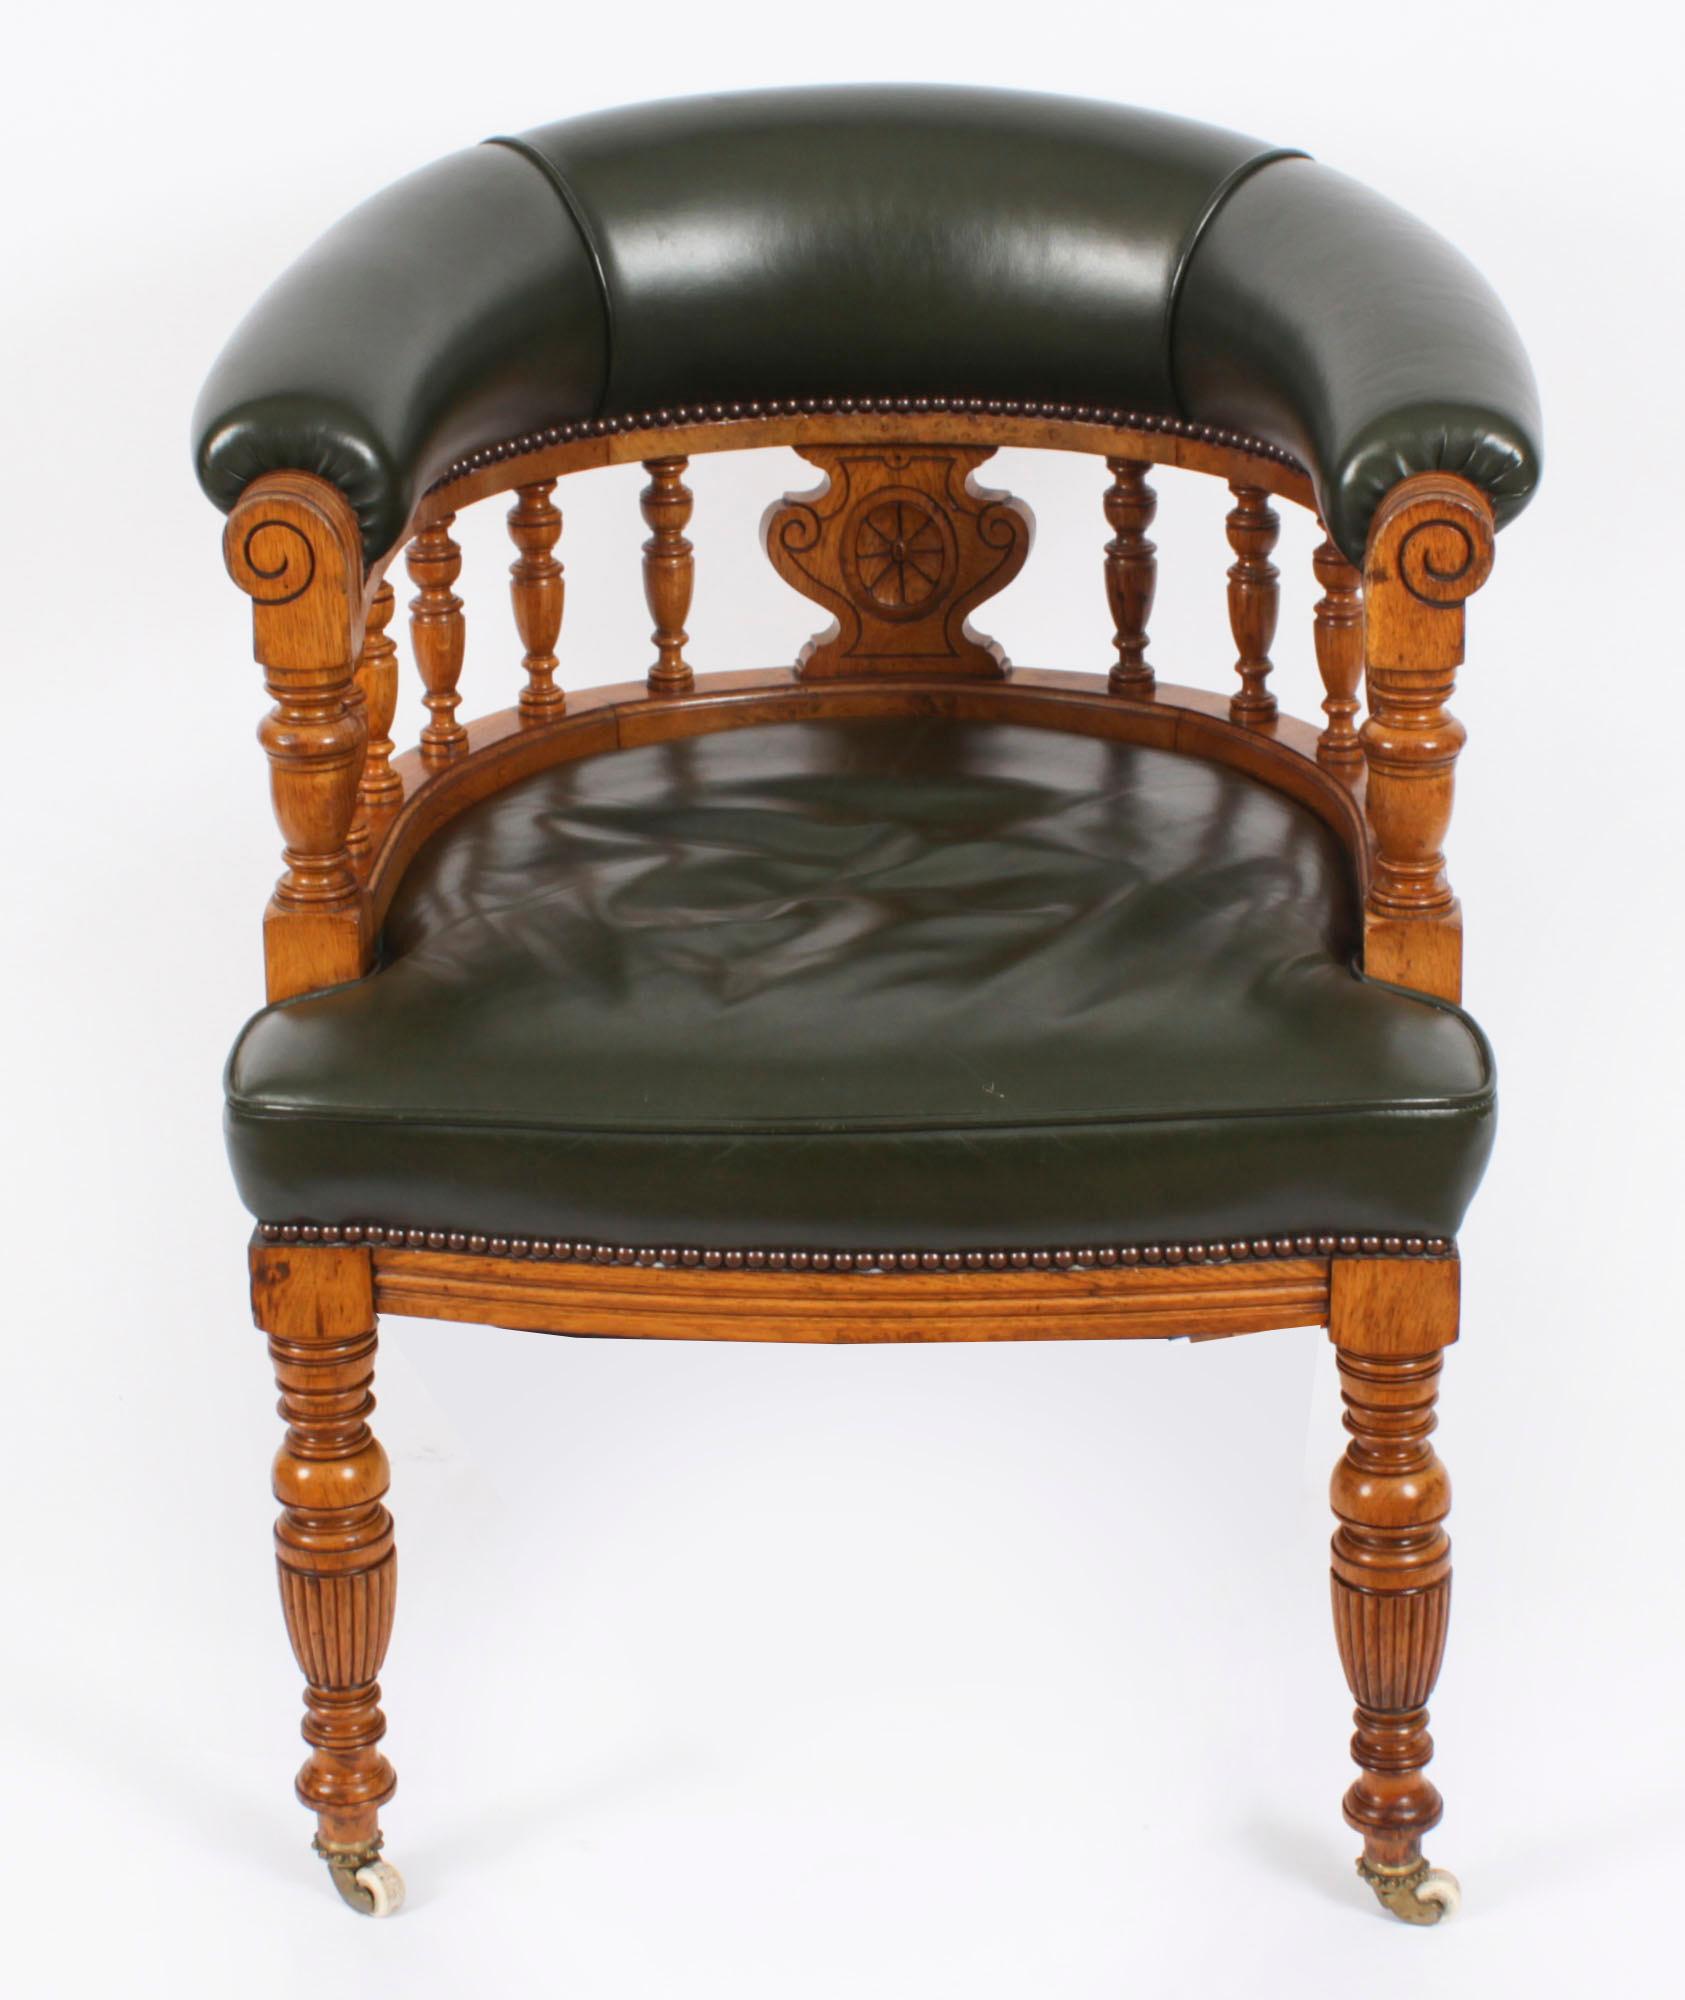 This is a very elegant antique Victorian tub desk walnut armchair, circa 1880 in date.

An Edwardian honey oak and green leather upholstery desk chair, circa 1910 in date.

The chair features a curved back with turned balustrade spindles and padded